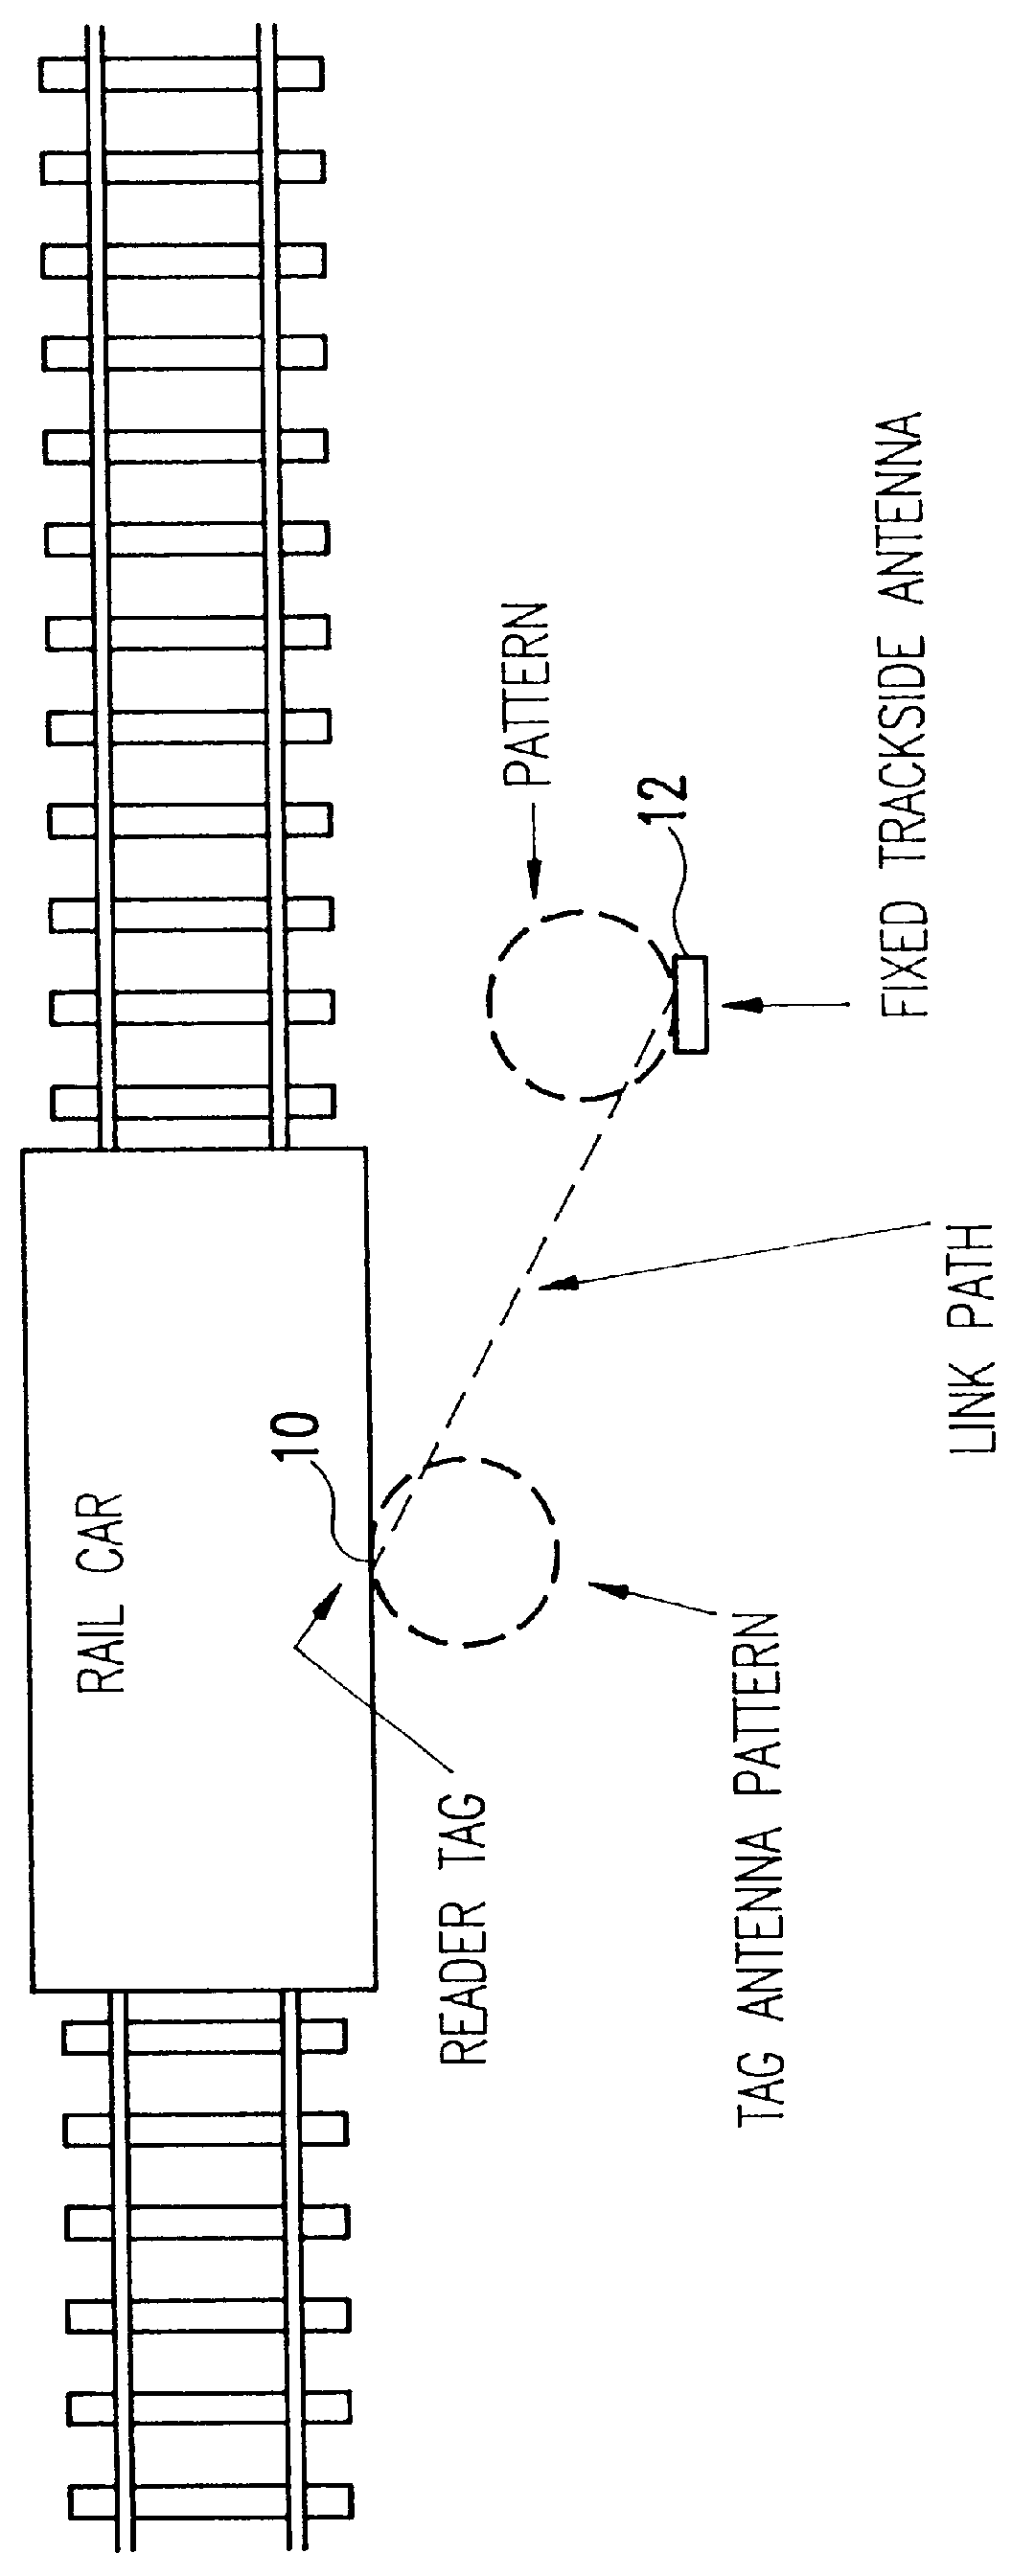 Phased array antenna for radio frequency identification